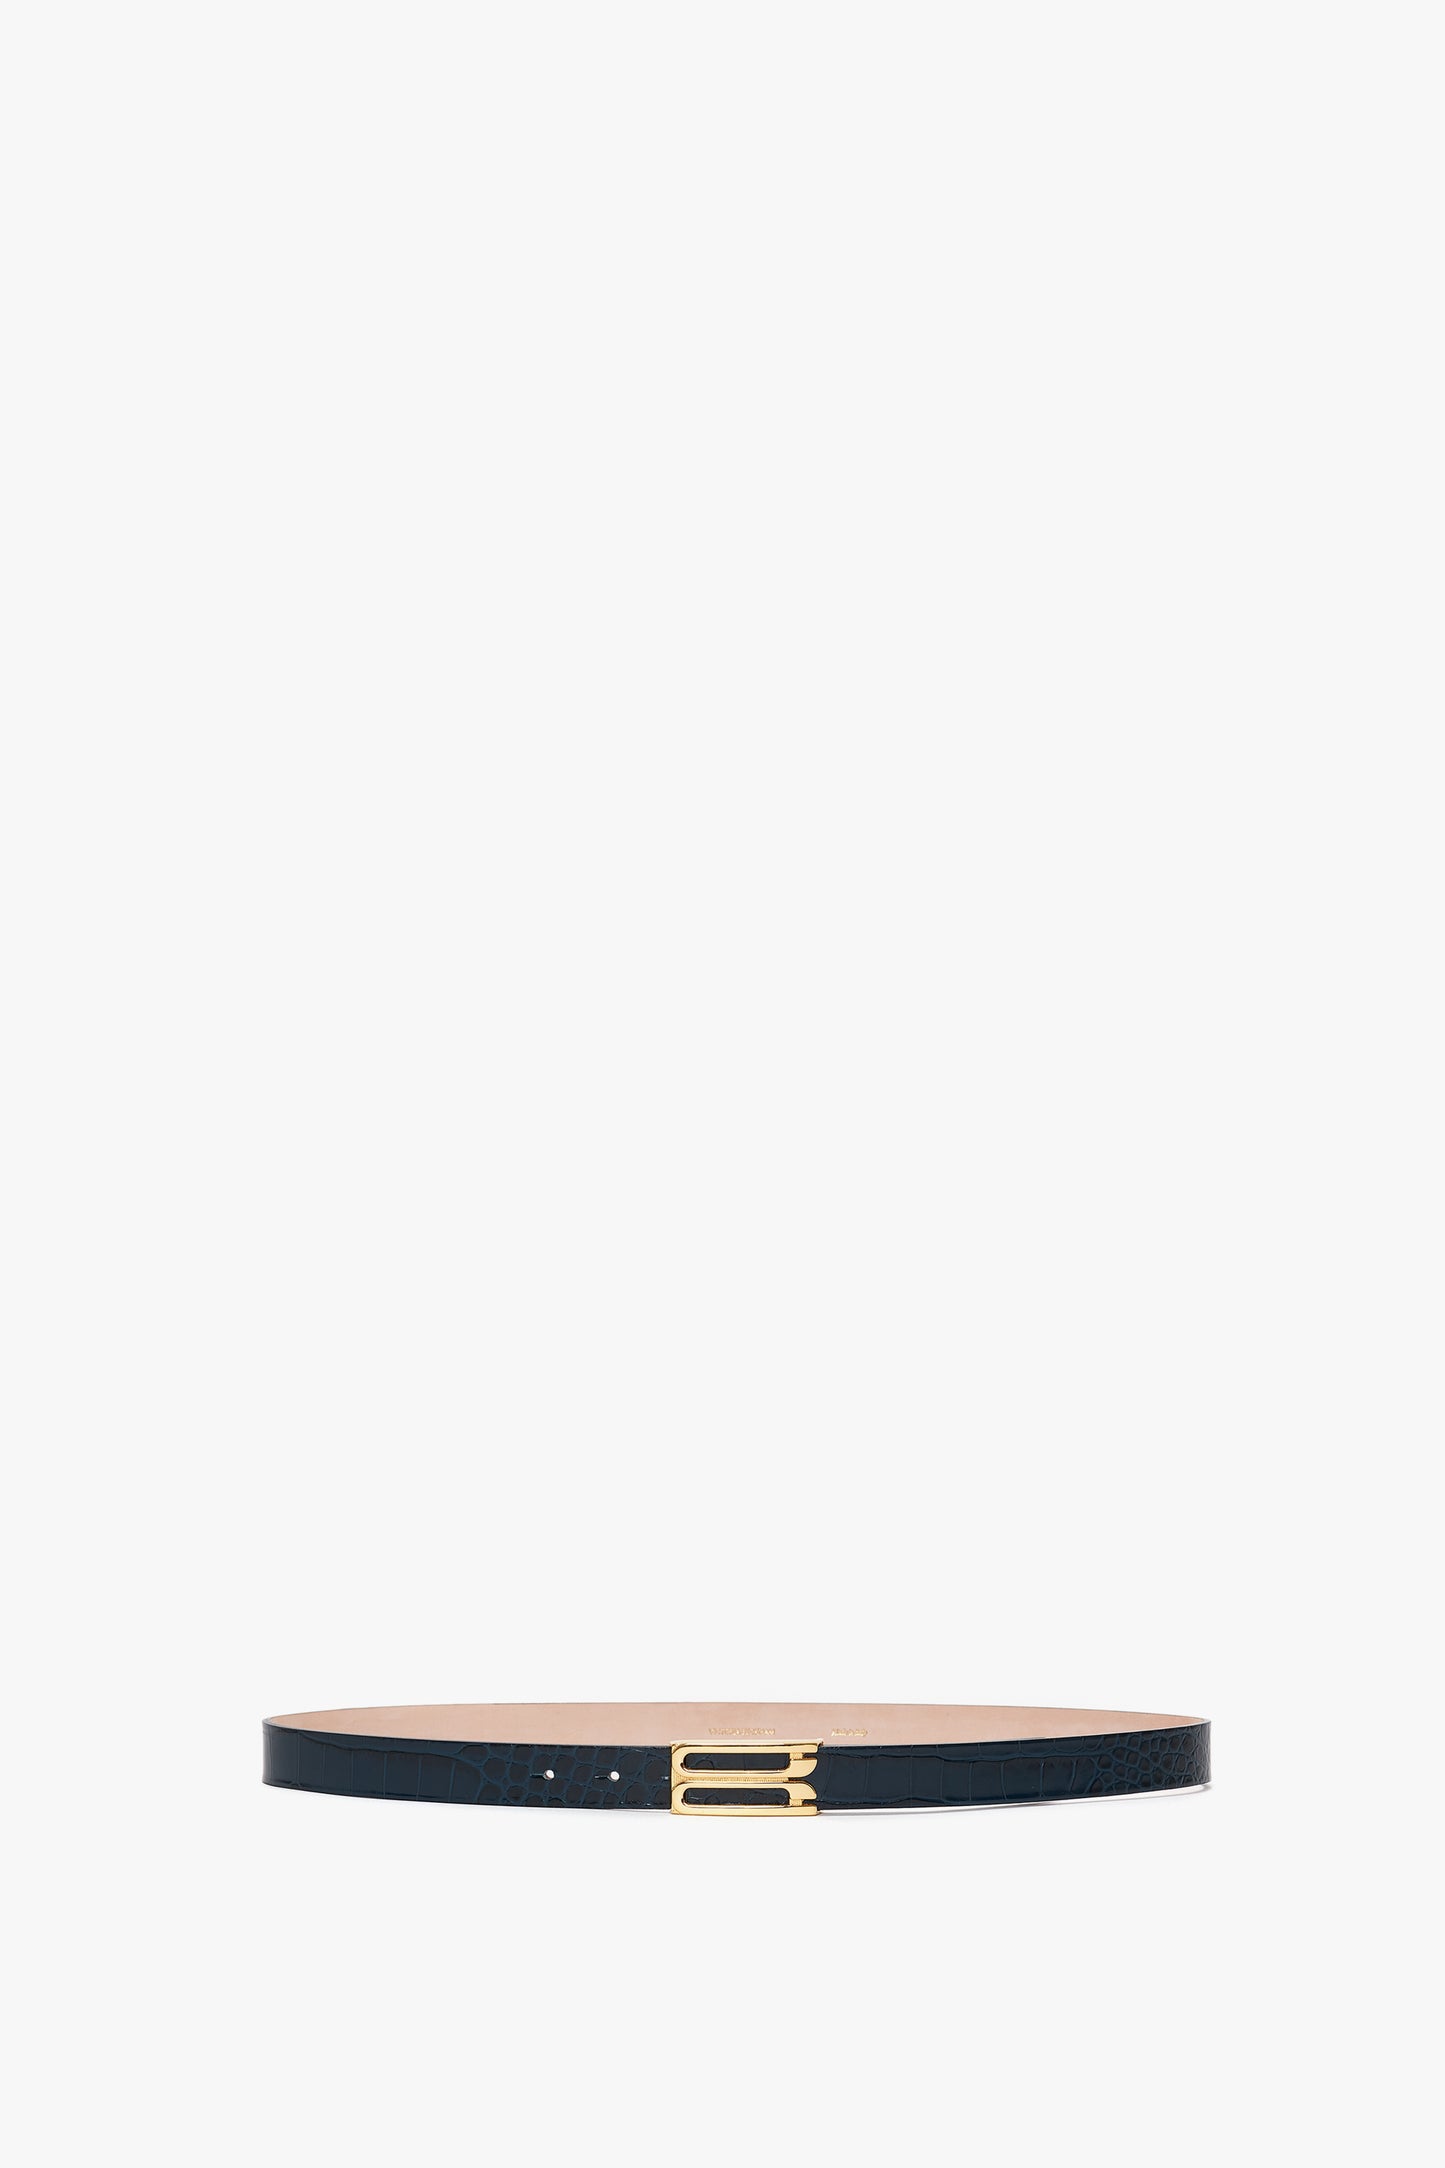 A Frame Belt In Midnight Blue Croc Embossed Calf Leather by Victoria Beckham featuring a slim gold buckle is displayed on a plain white background.